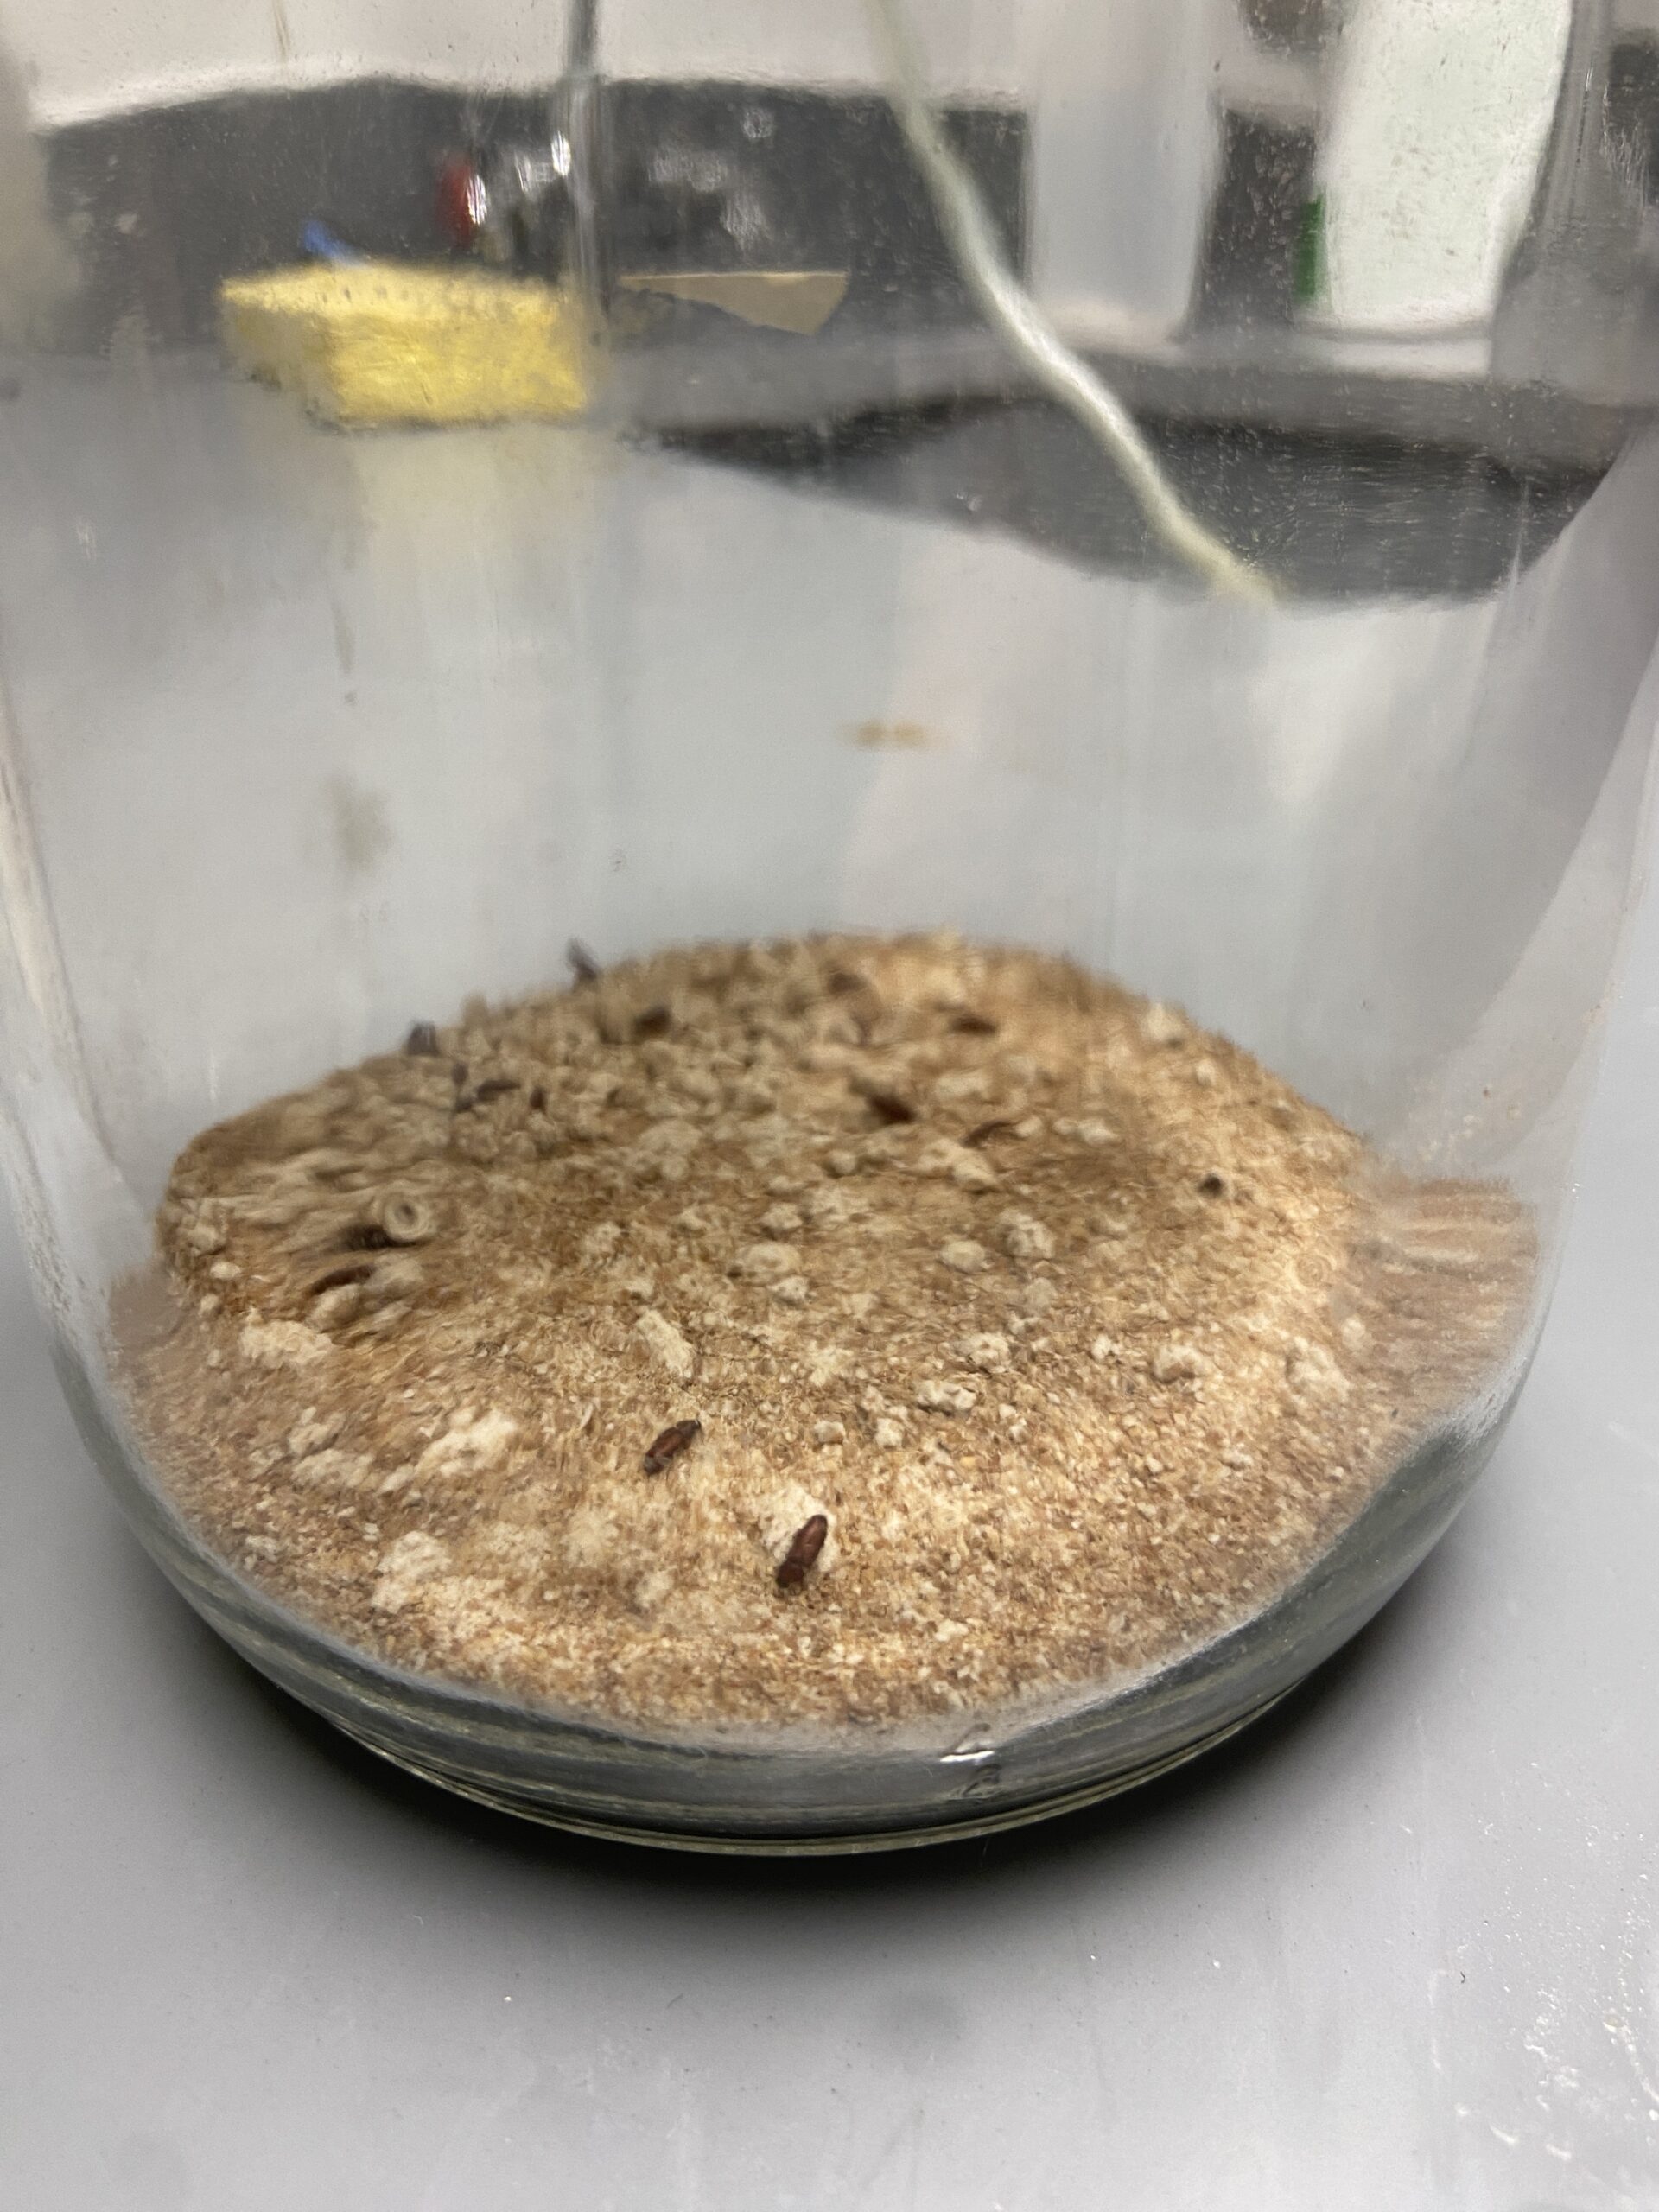 A glass jar containing a light brown, granular substance, likely a substrate, is partially filled. Several small, dark brown insects, identified as flour beetles, are visible on the surface of the substrate. The jar is placed on a gray tabletop in what appears to be a laboratory setting.